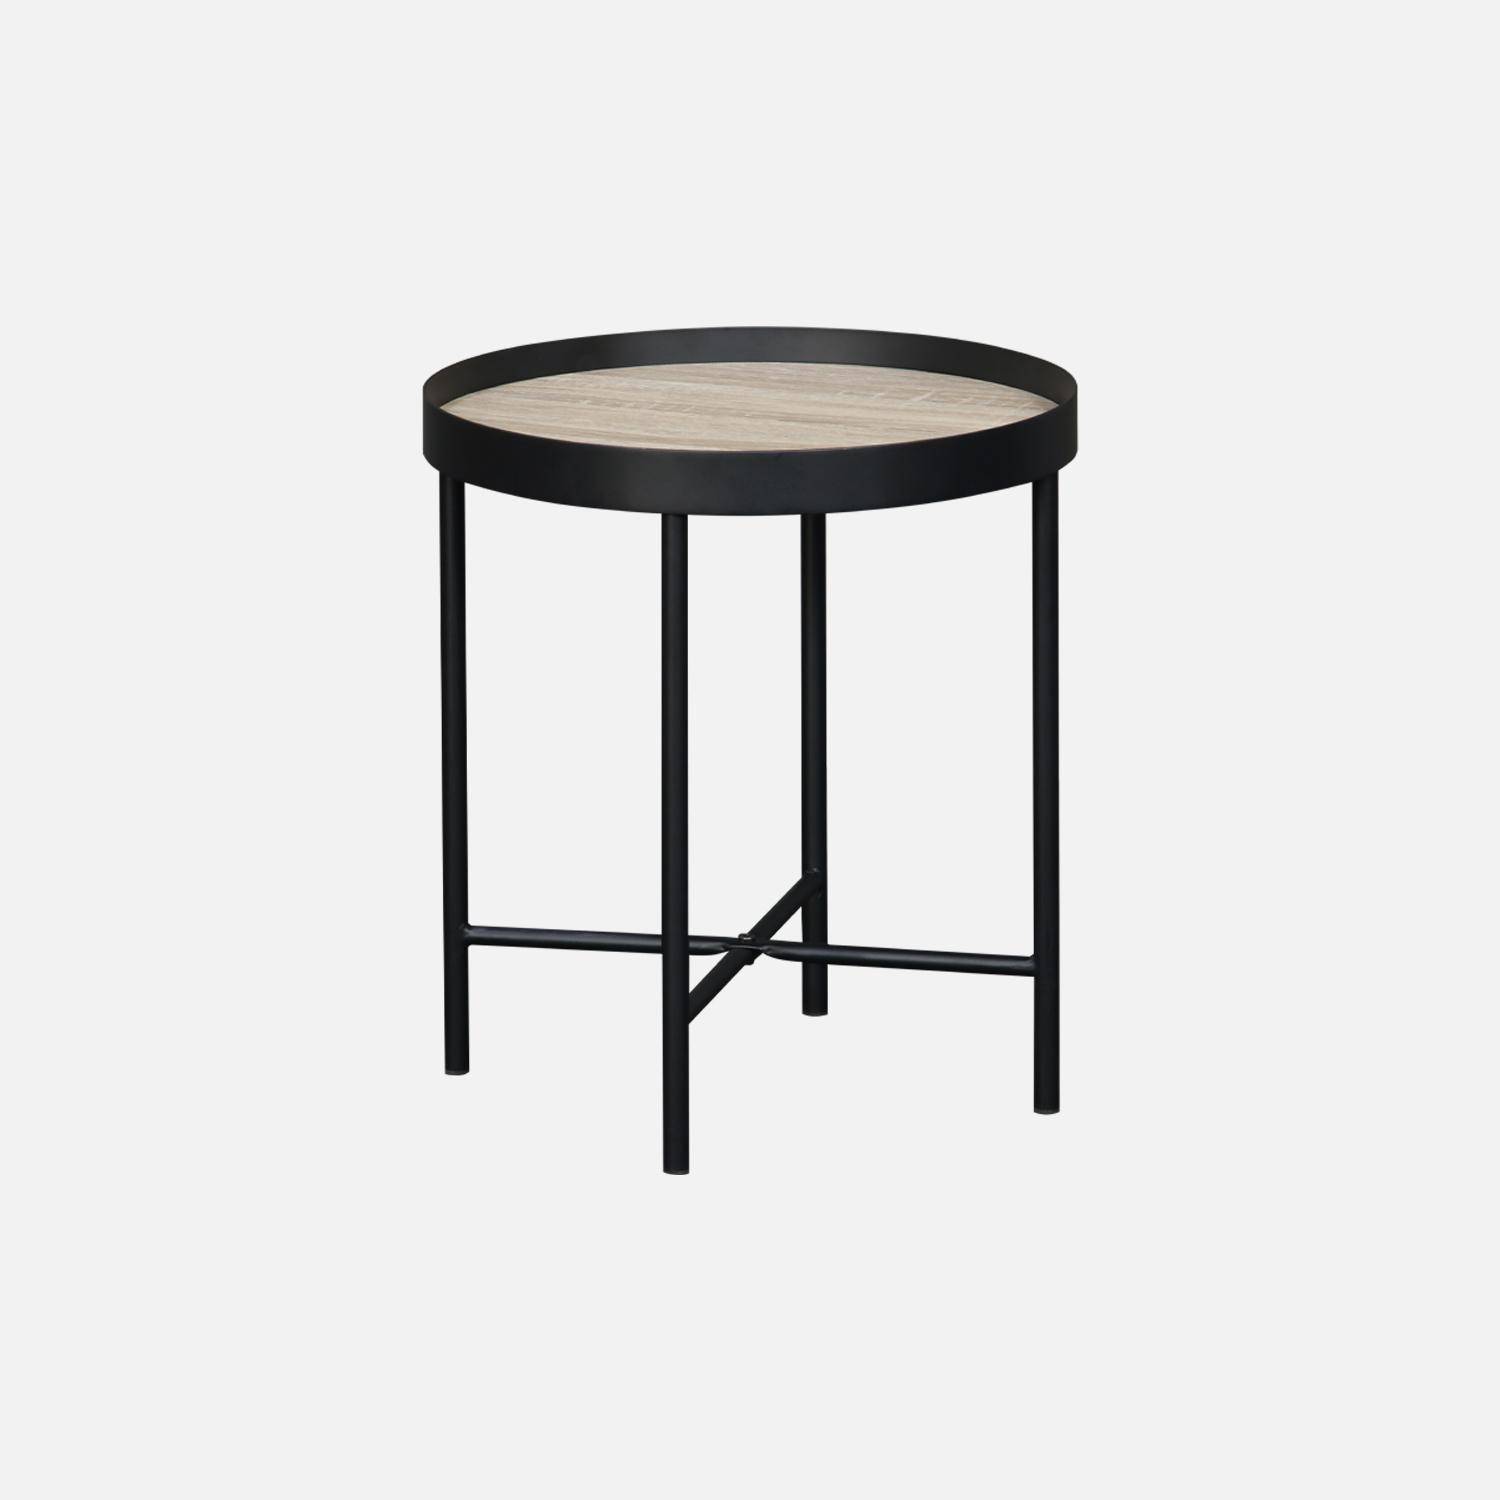 Set of 2 practical round nesting tables in oak-effect MDF with black legs Photo5